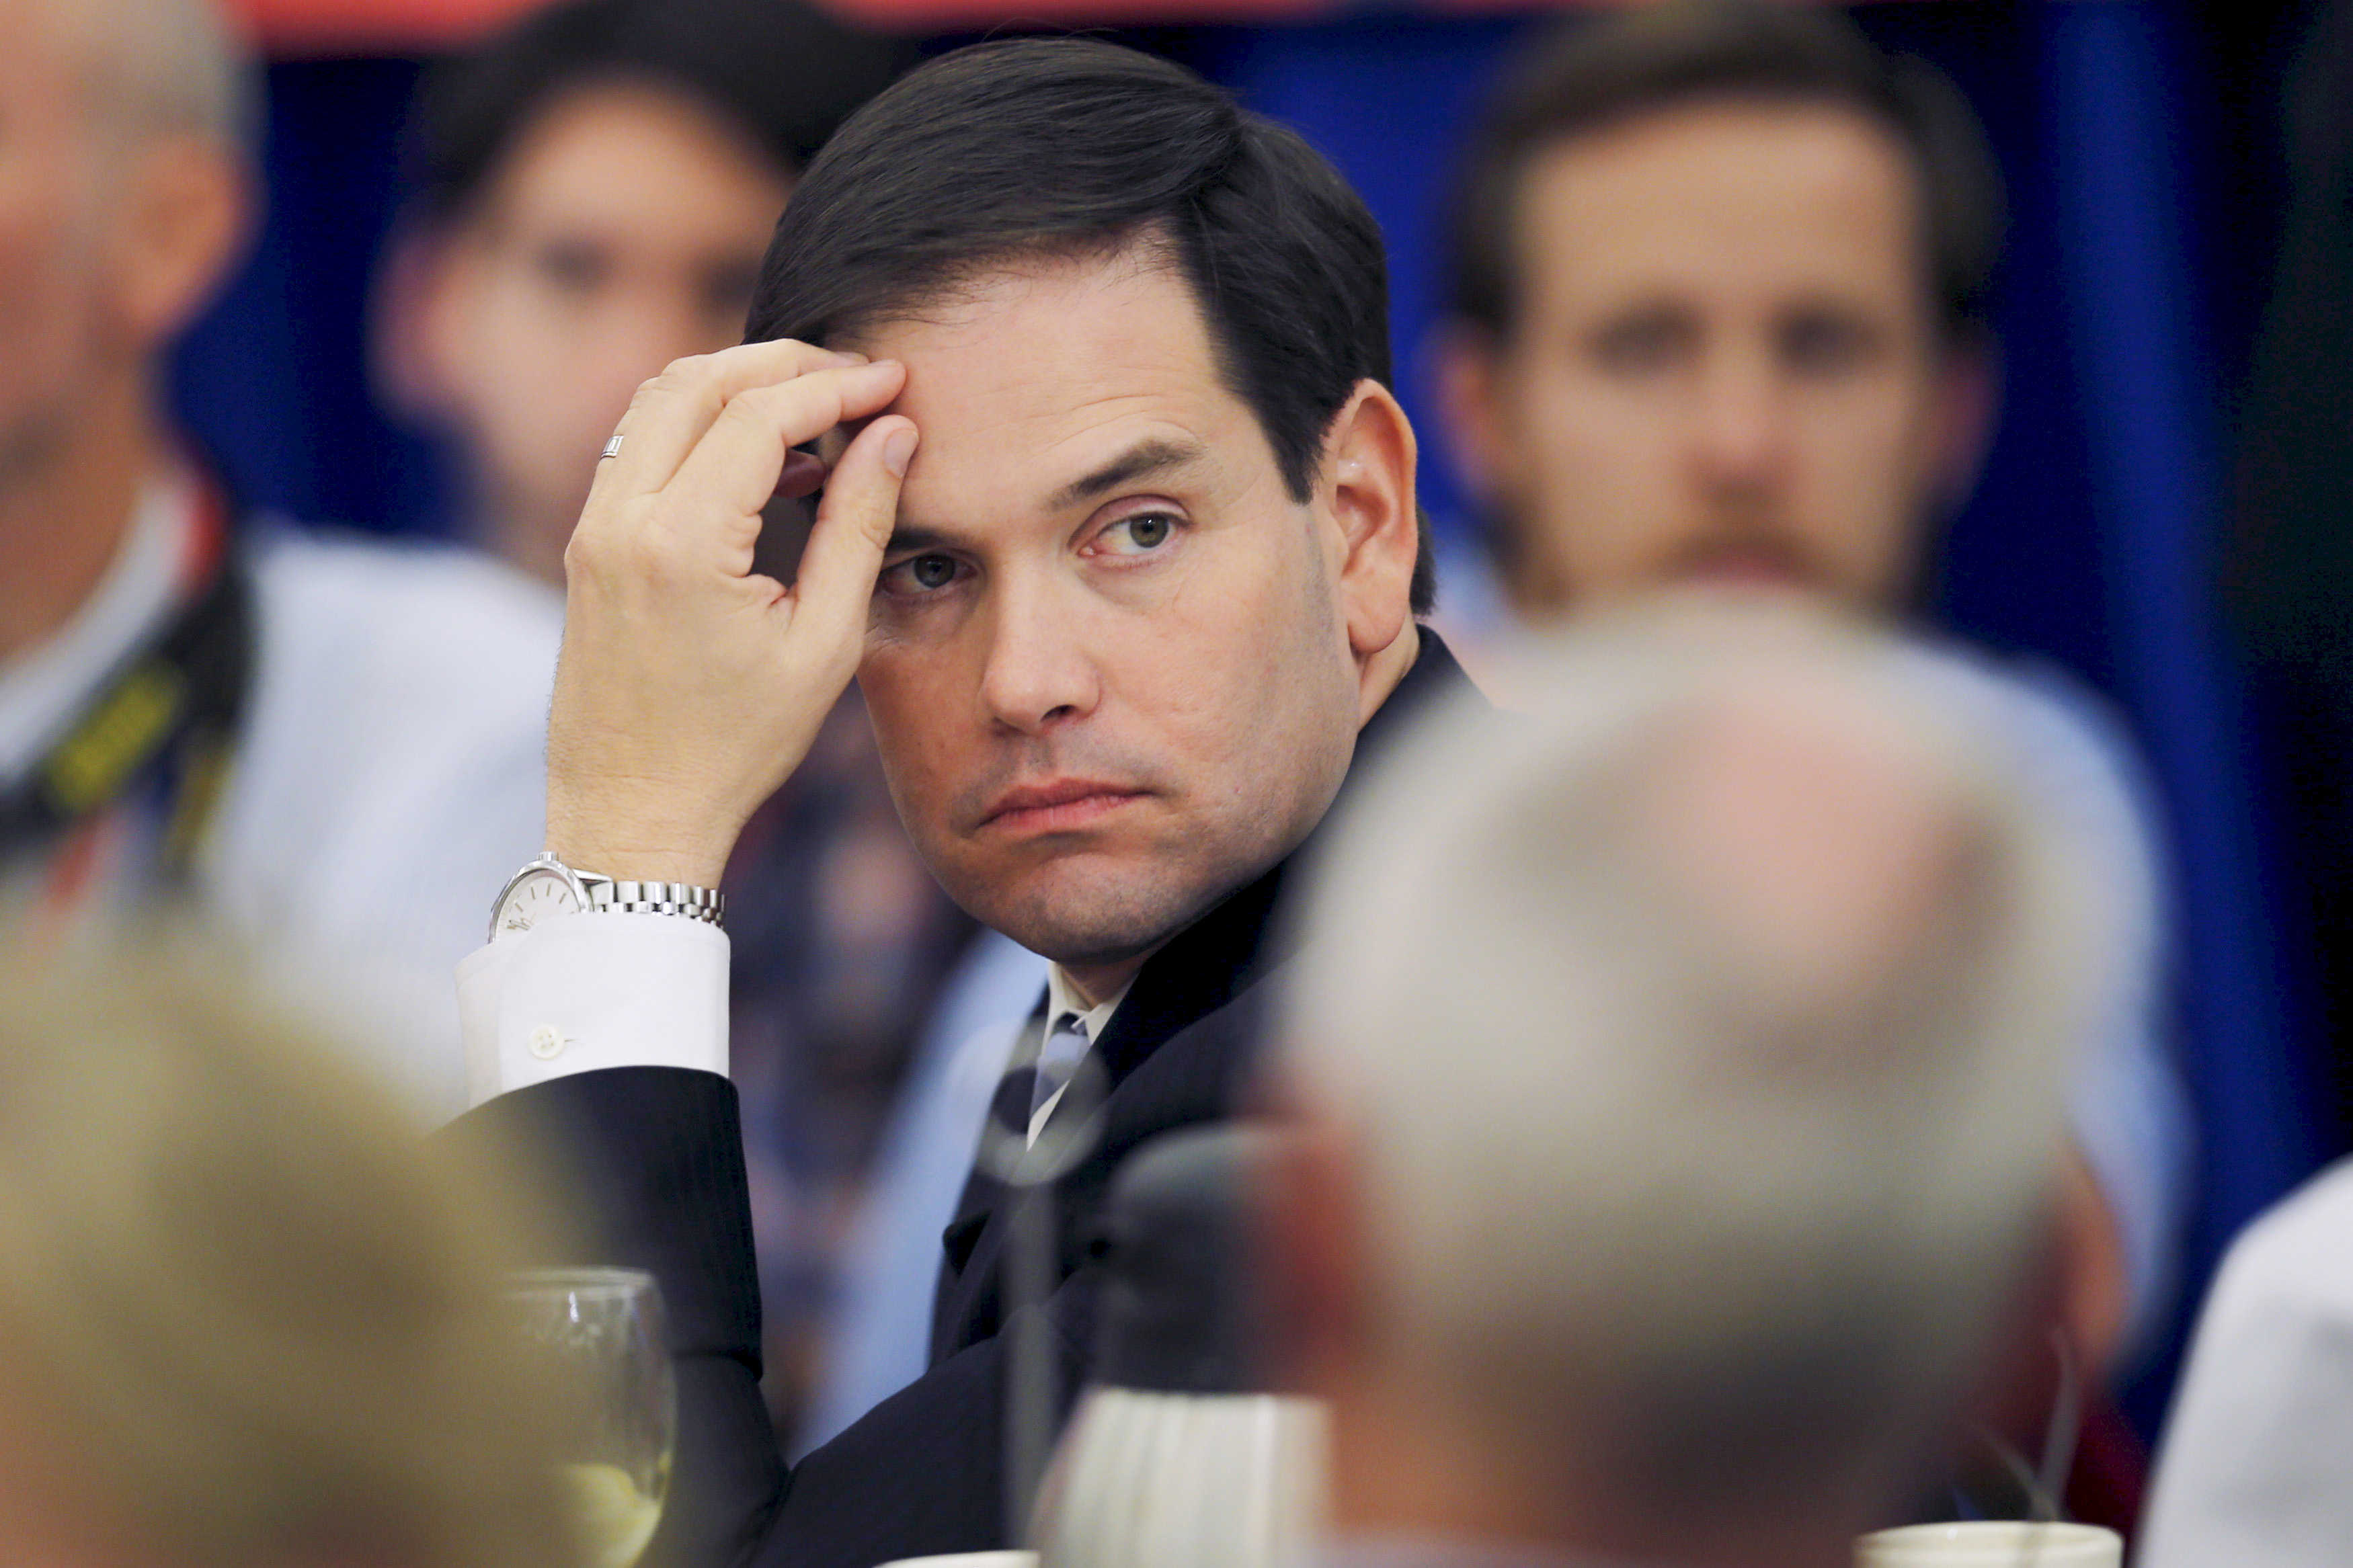 Marco Rubio trails behind Donald Trump and Ted Cruz.